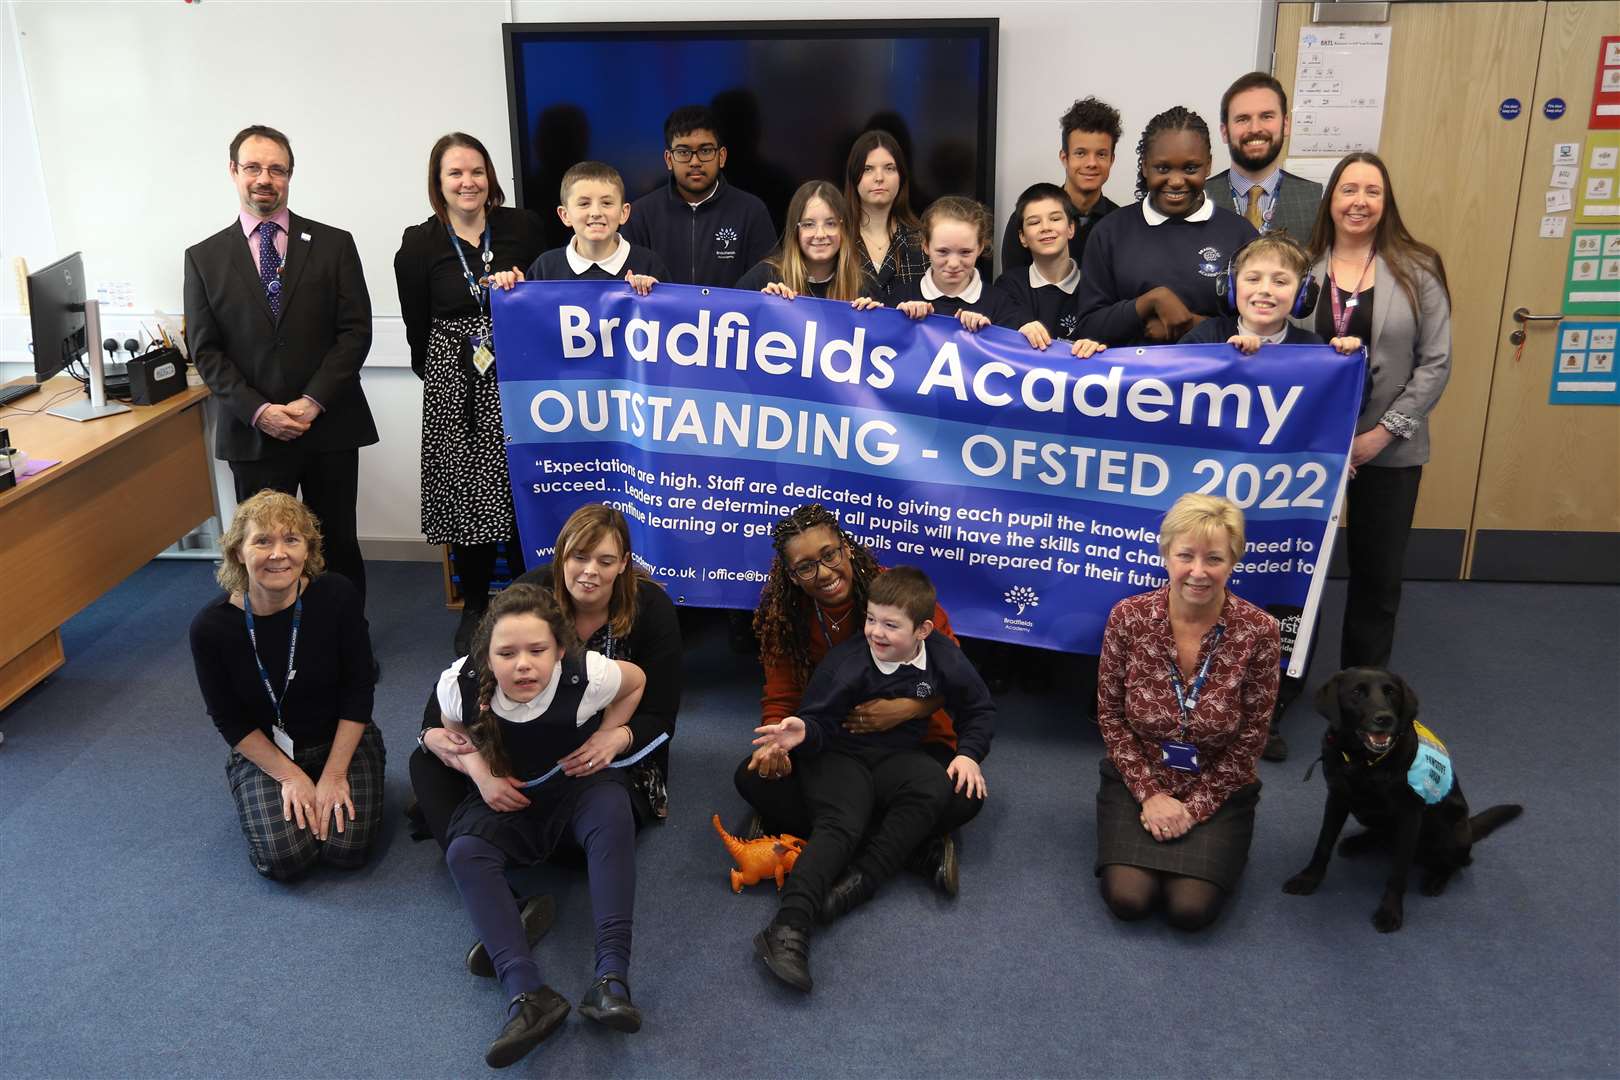 Bradfields Academy in Chatham was rated 'Outstanding' after an Ofsted inspection